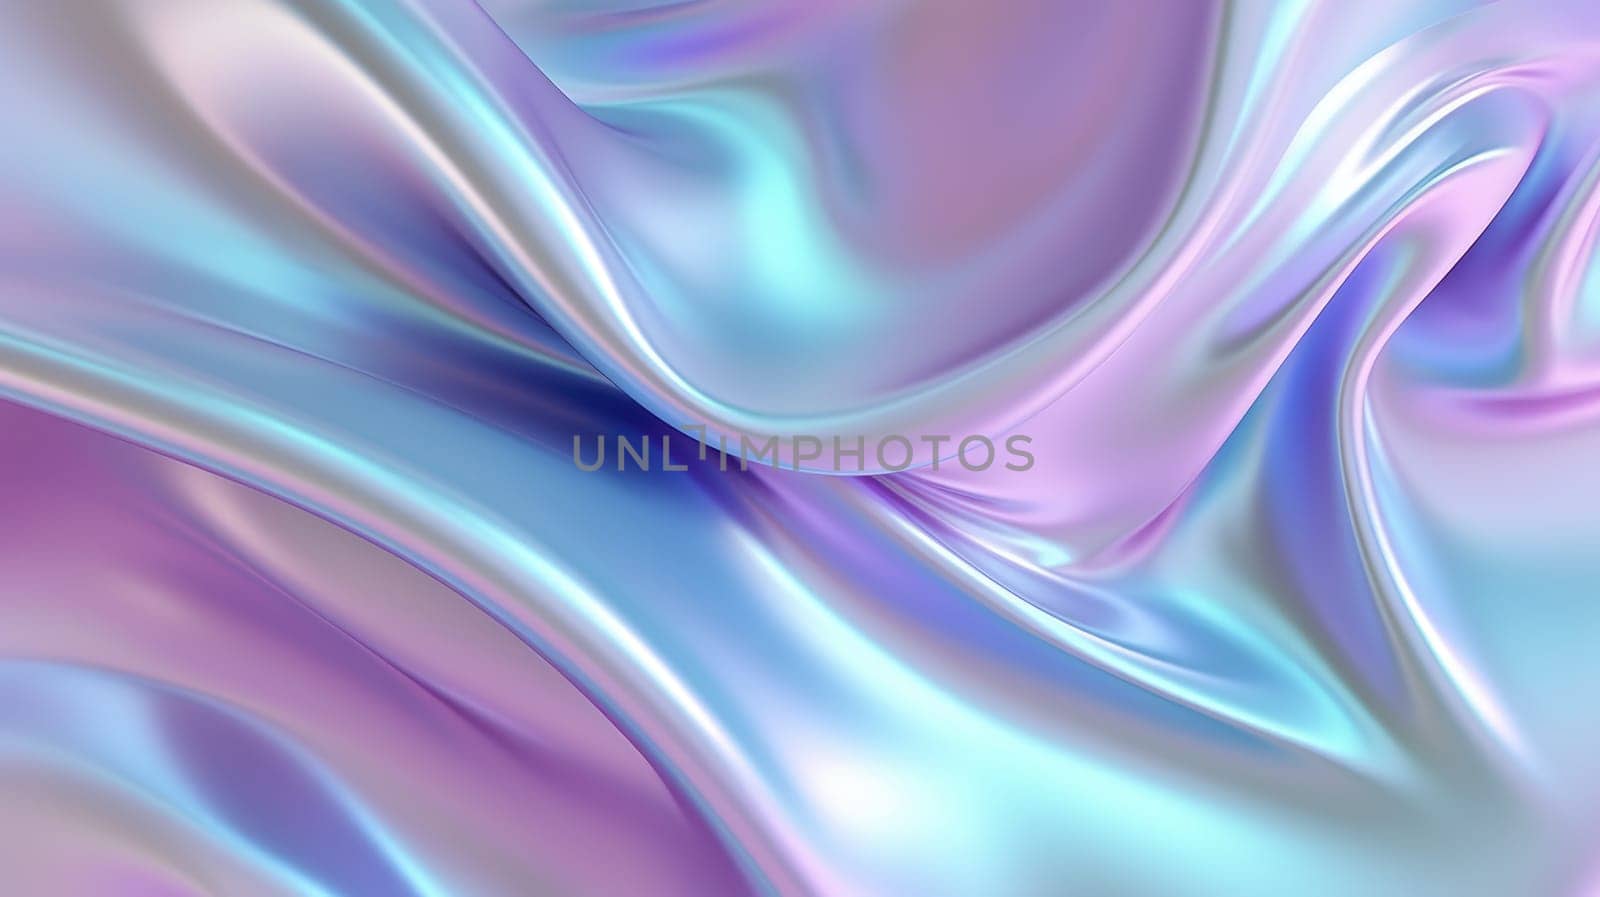 Abstract trendy holographic background. Blurred rainbow light refraction texture overlay effect by natali_brill